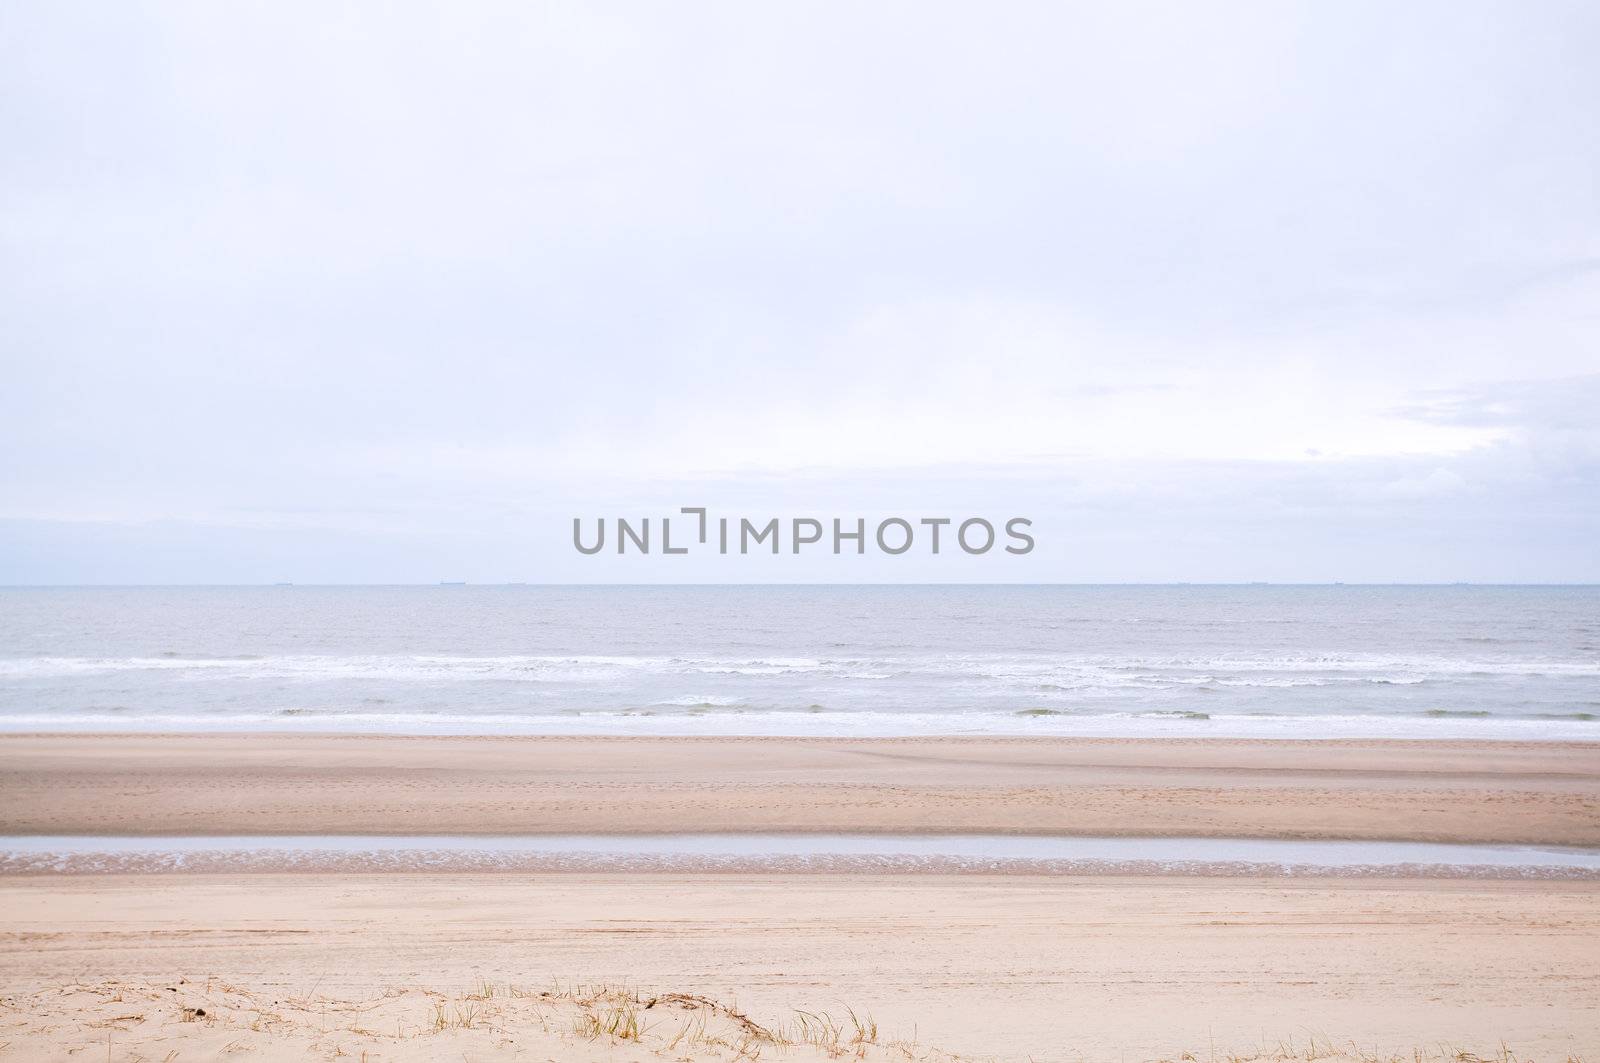 Dutch abstract landscape with sandy beach and North Sea